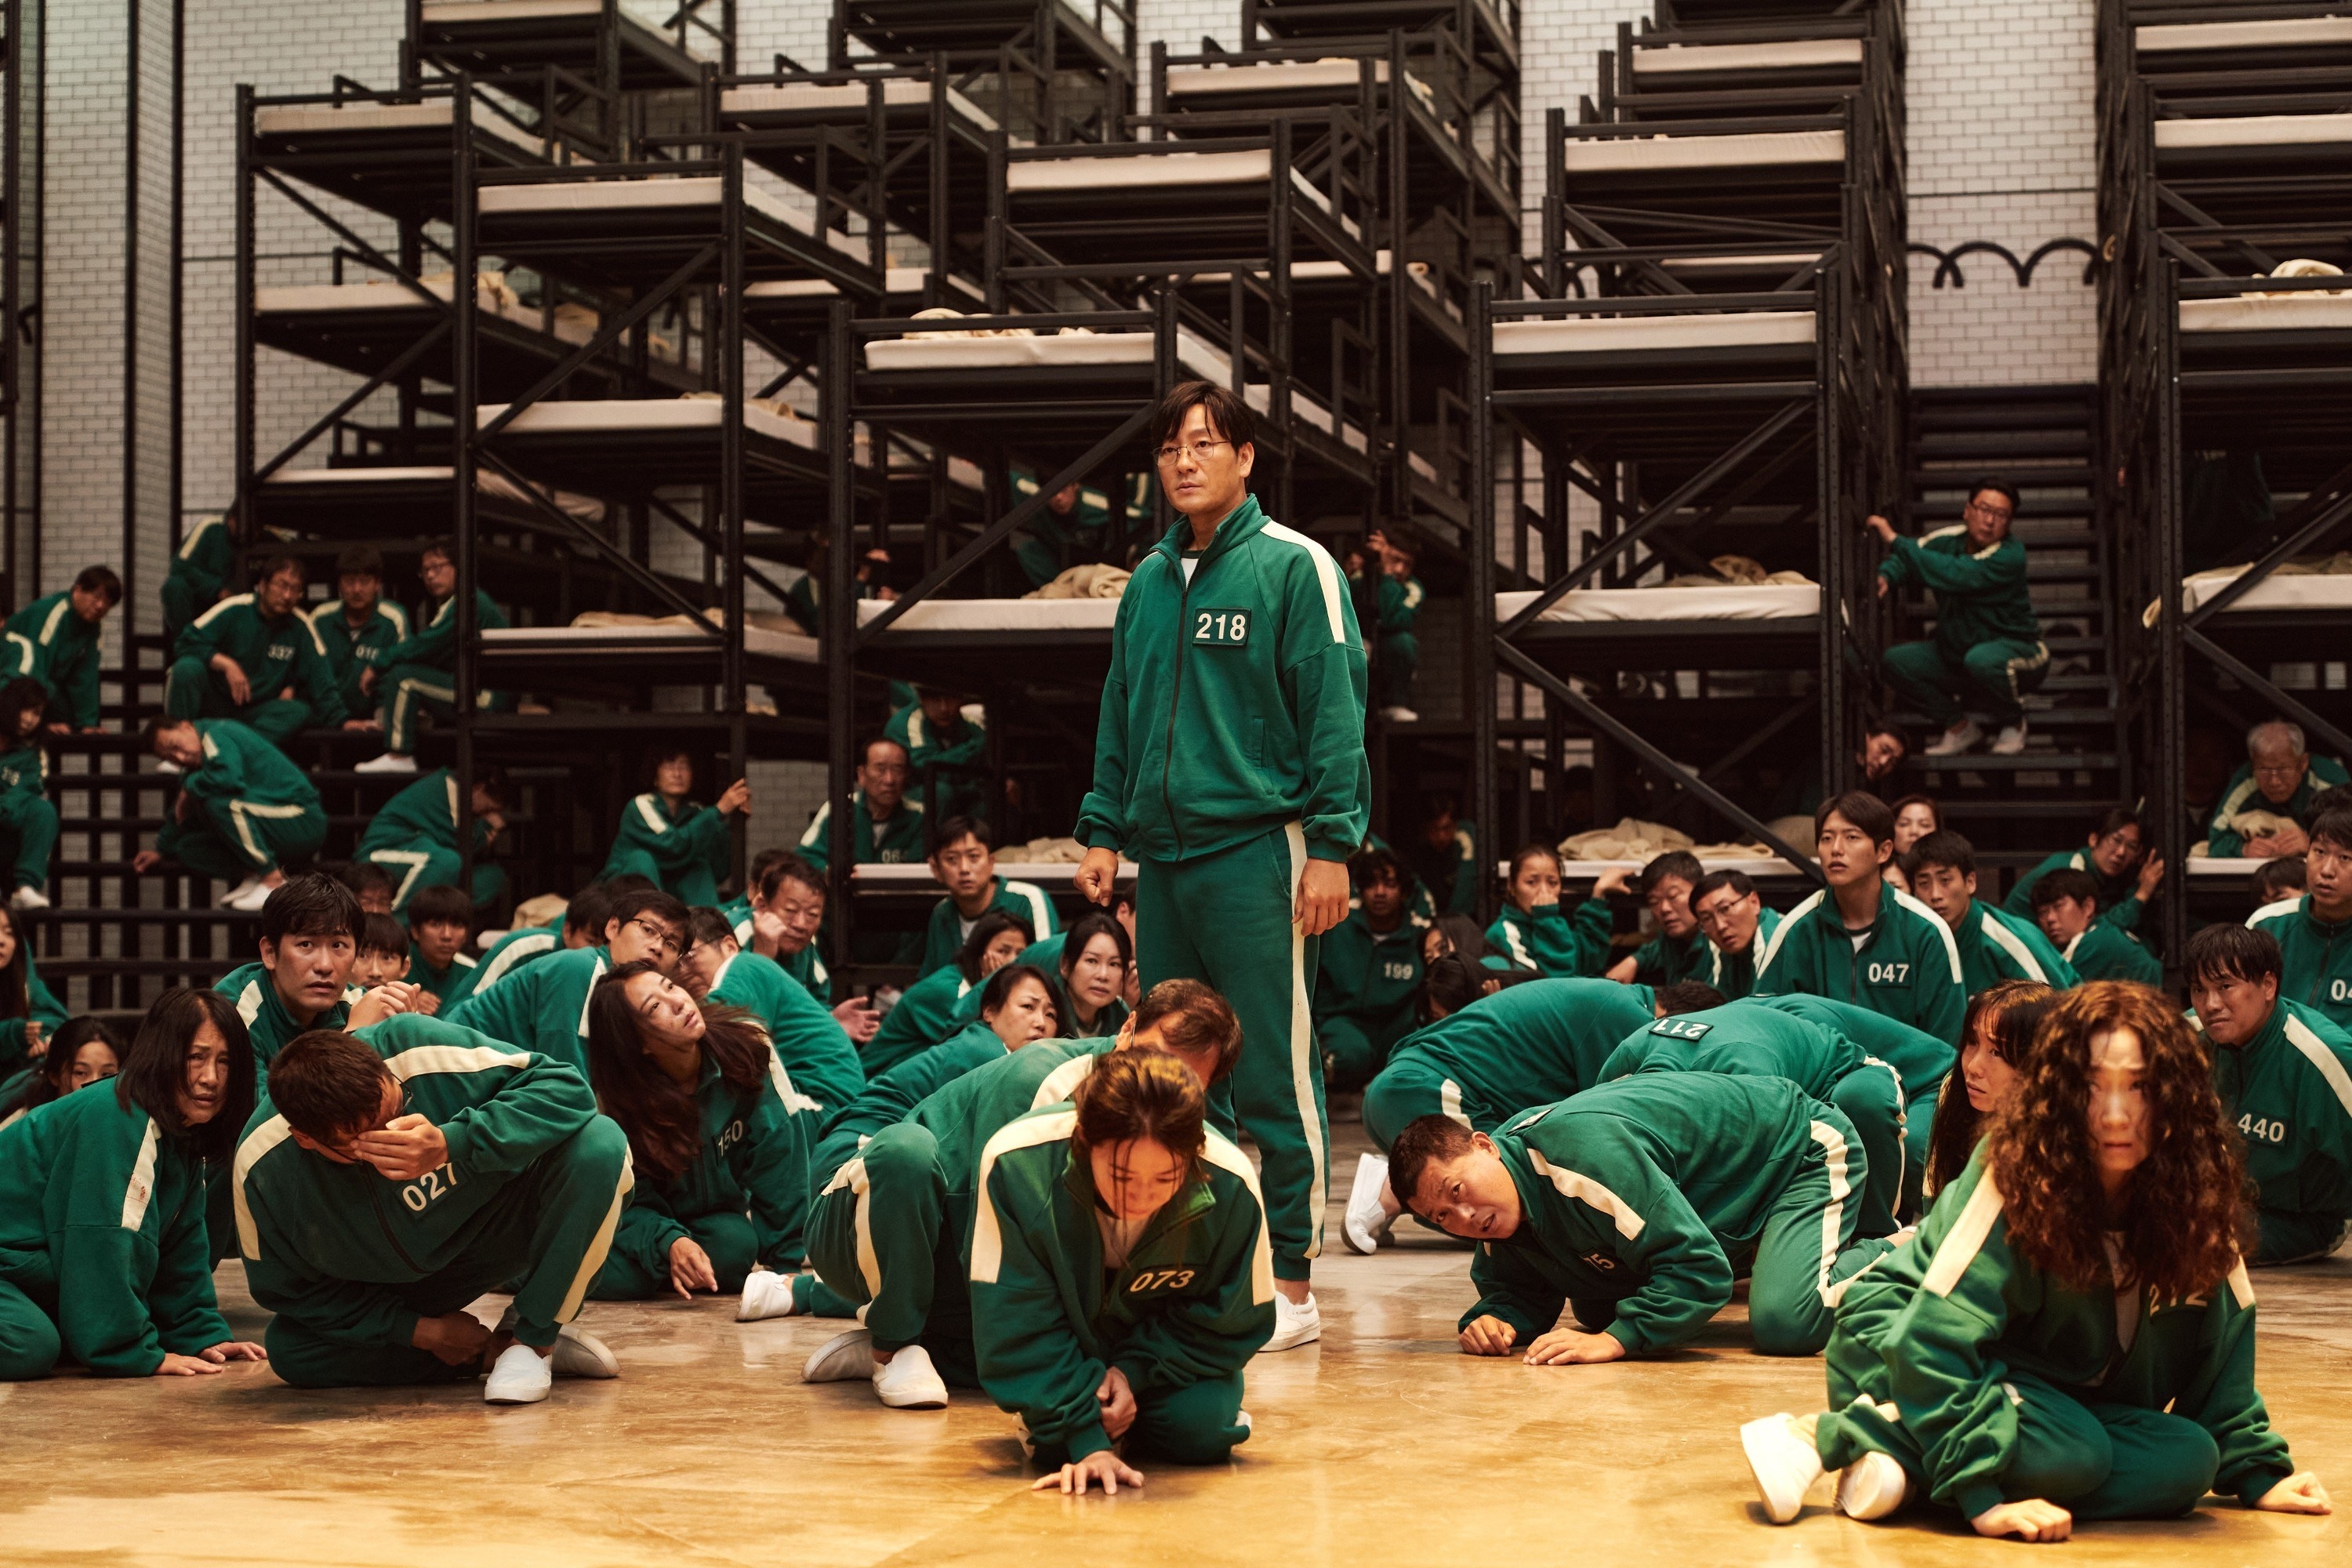 Park Hae-soo stands up in a room full of crouching people wearing tracksuits